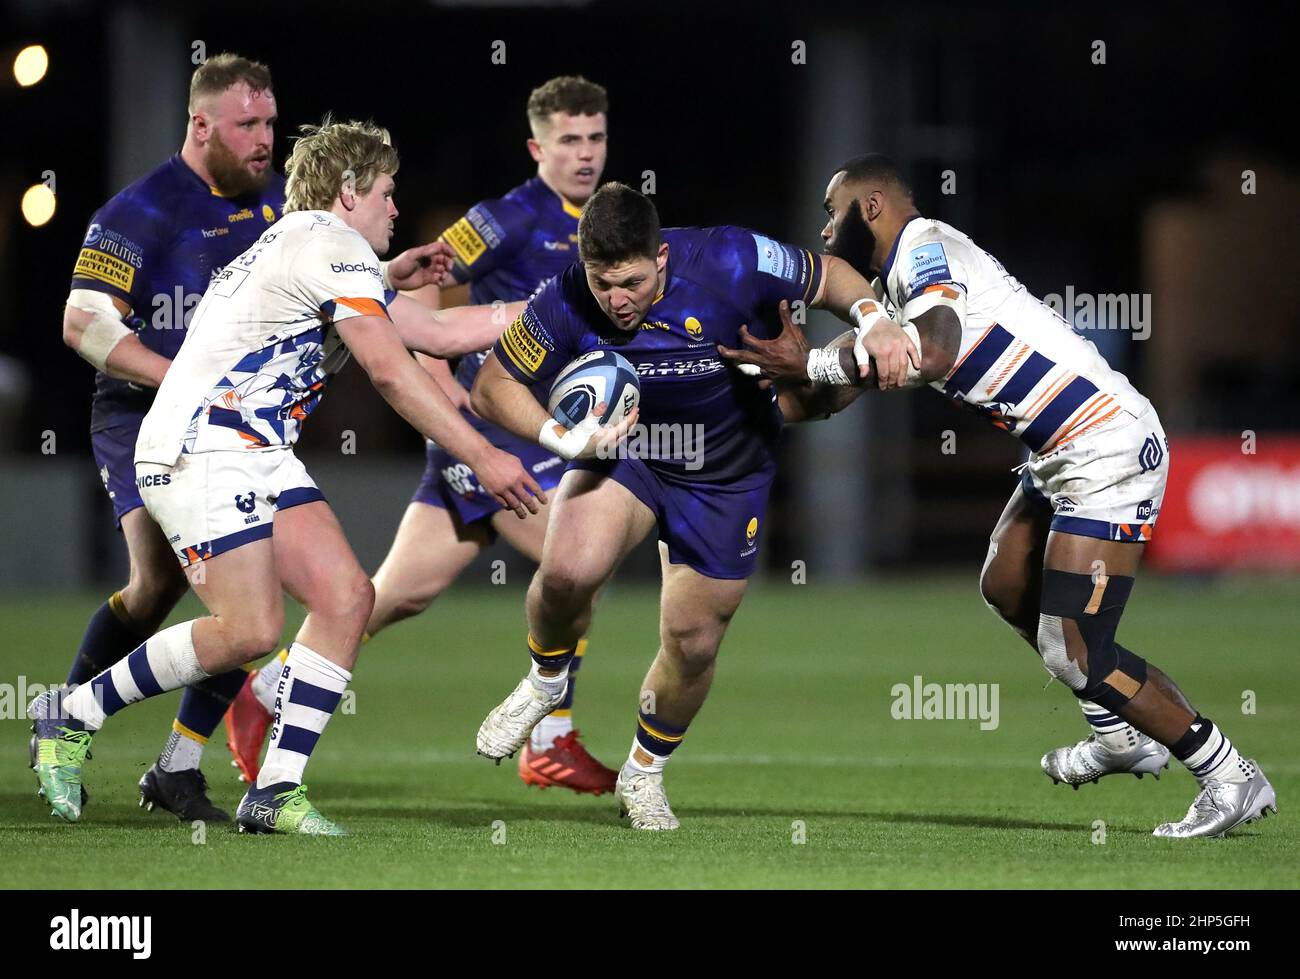 Worcester Warriors' Ethan Waller (centre) tackled by Bristol Bears' Daniel Thomas (left) and Semi Radradra (right) during the Gallagher Premiership match at Sixways Stadium, Worcester. Picture date: Friday February 18, 2022. Stock Photo